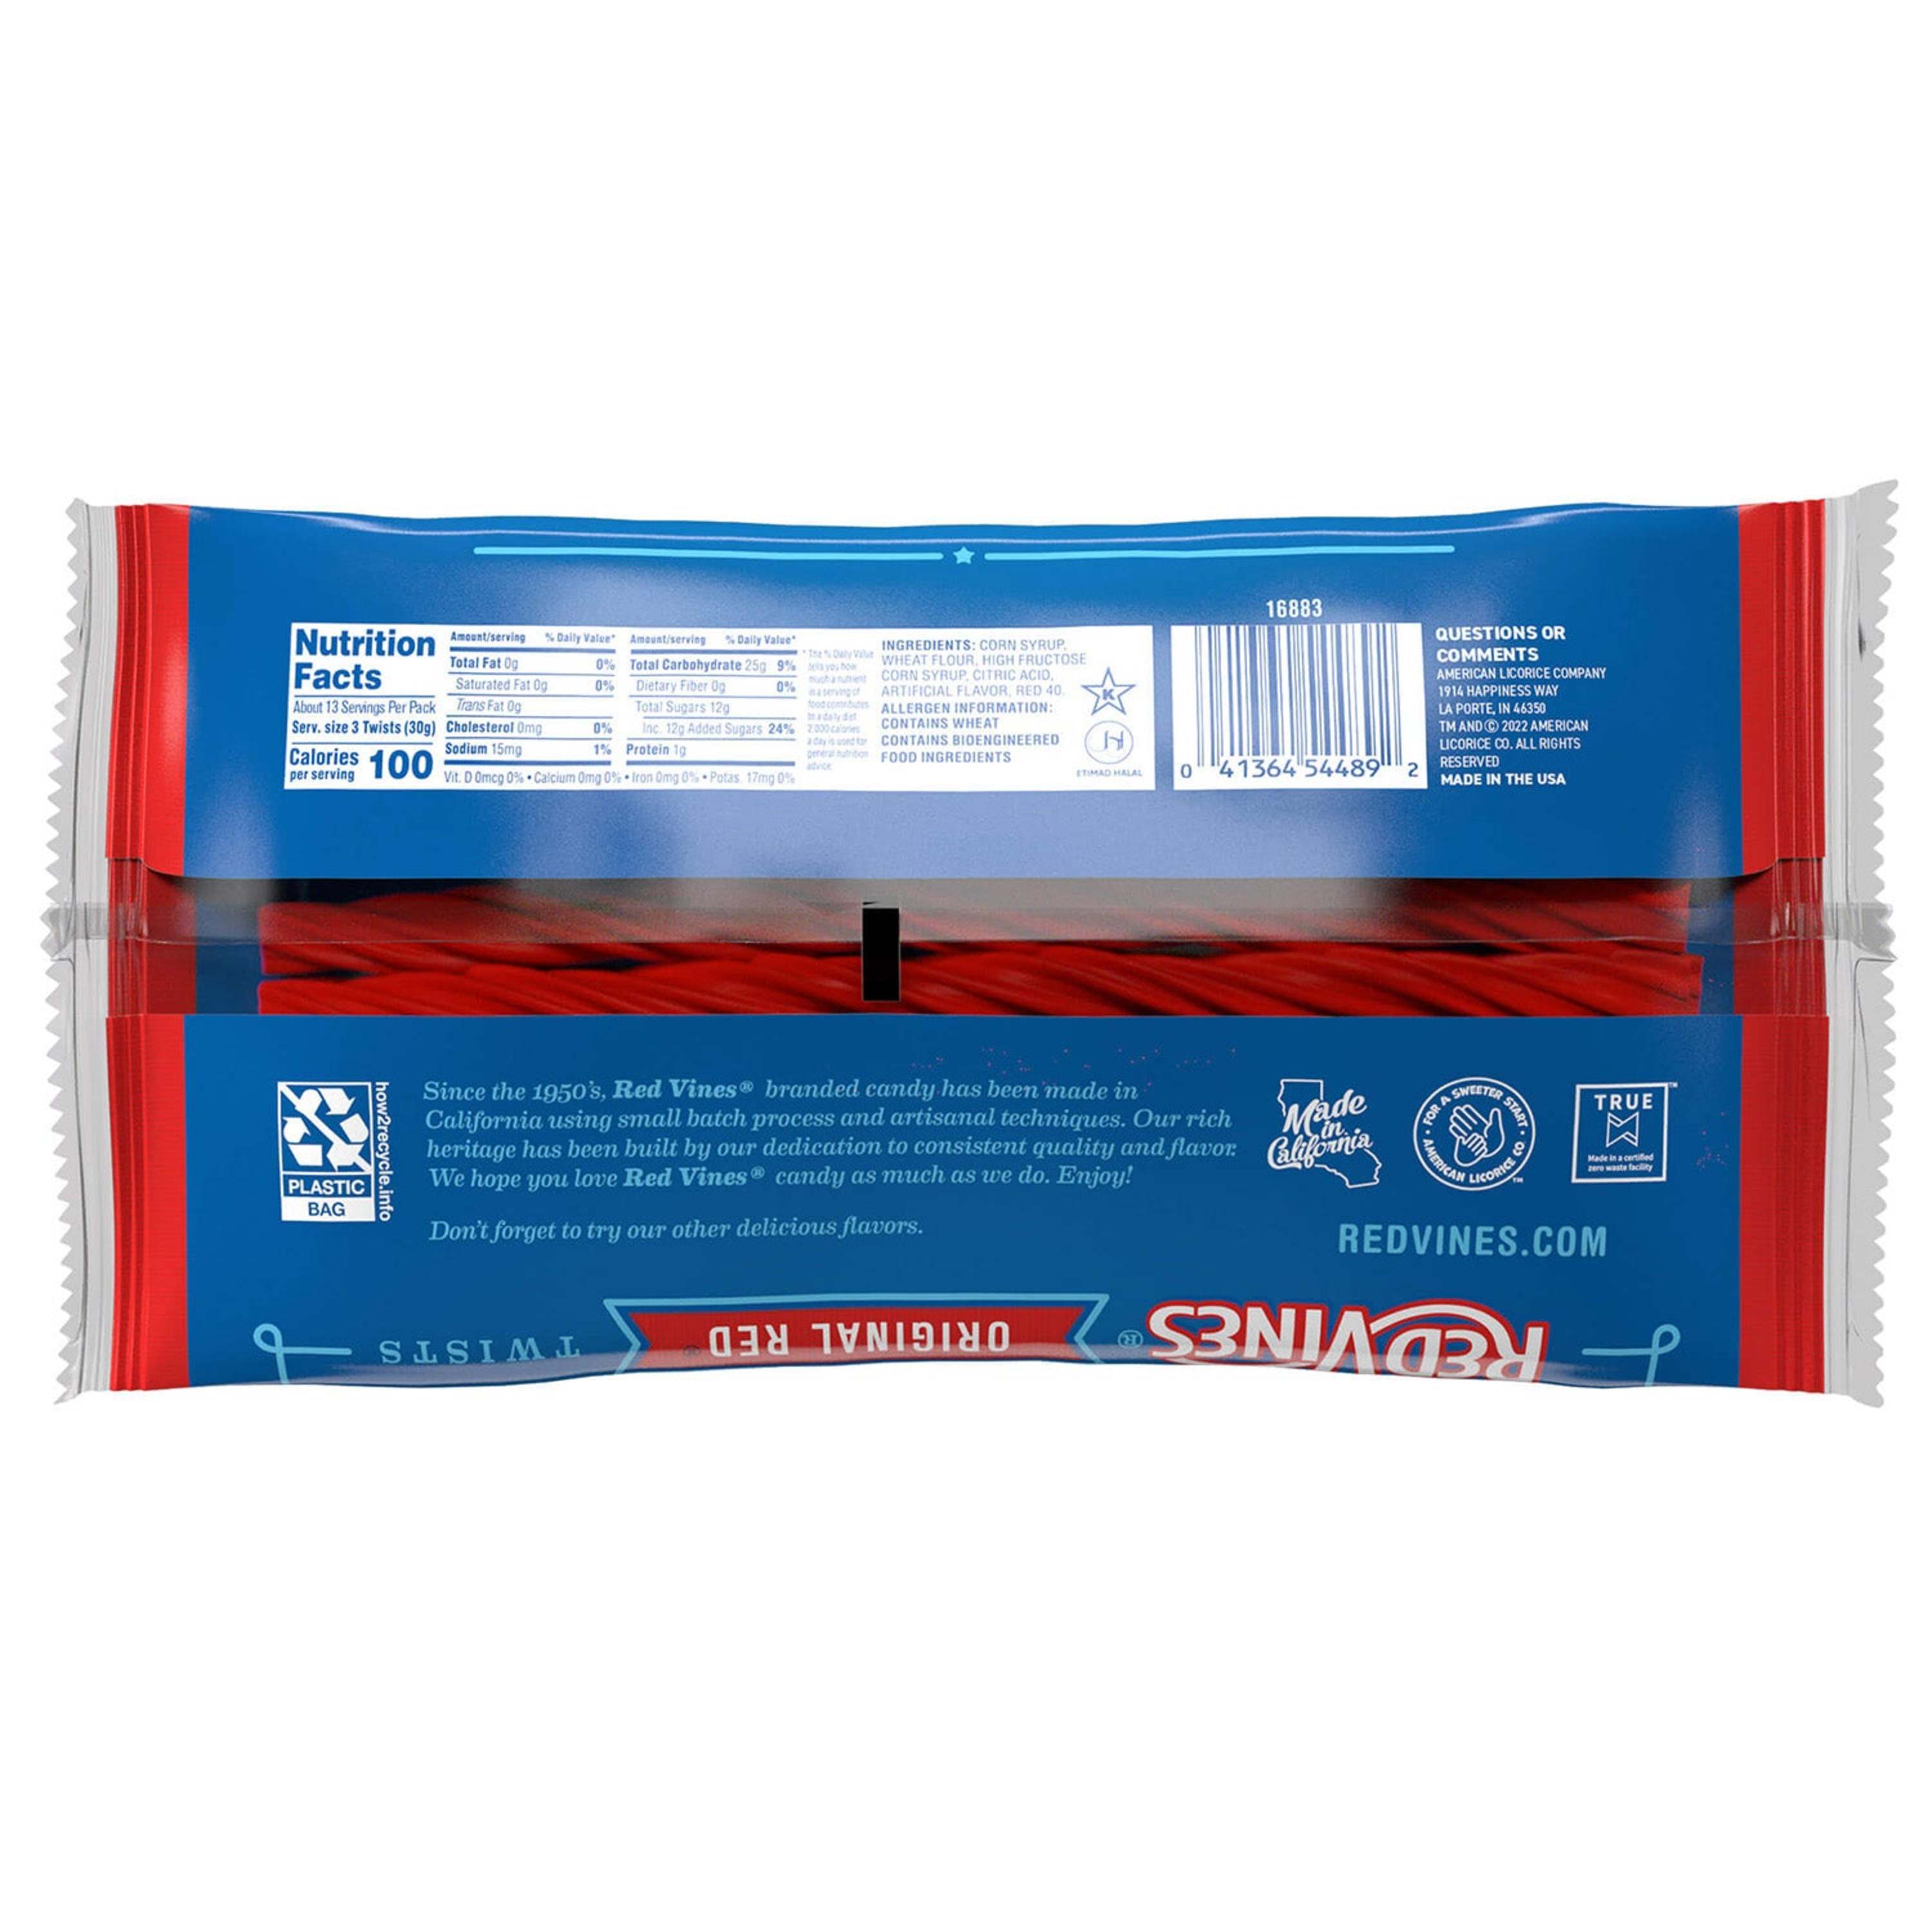 RED VINES Original Red licorice twists - back of 14oz bag